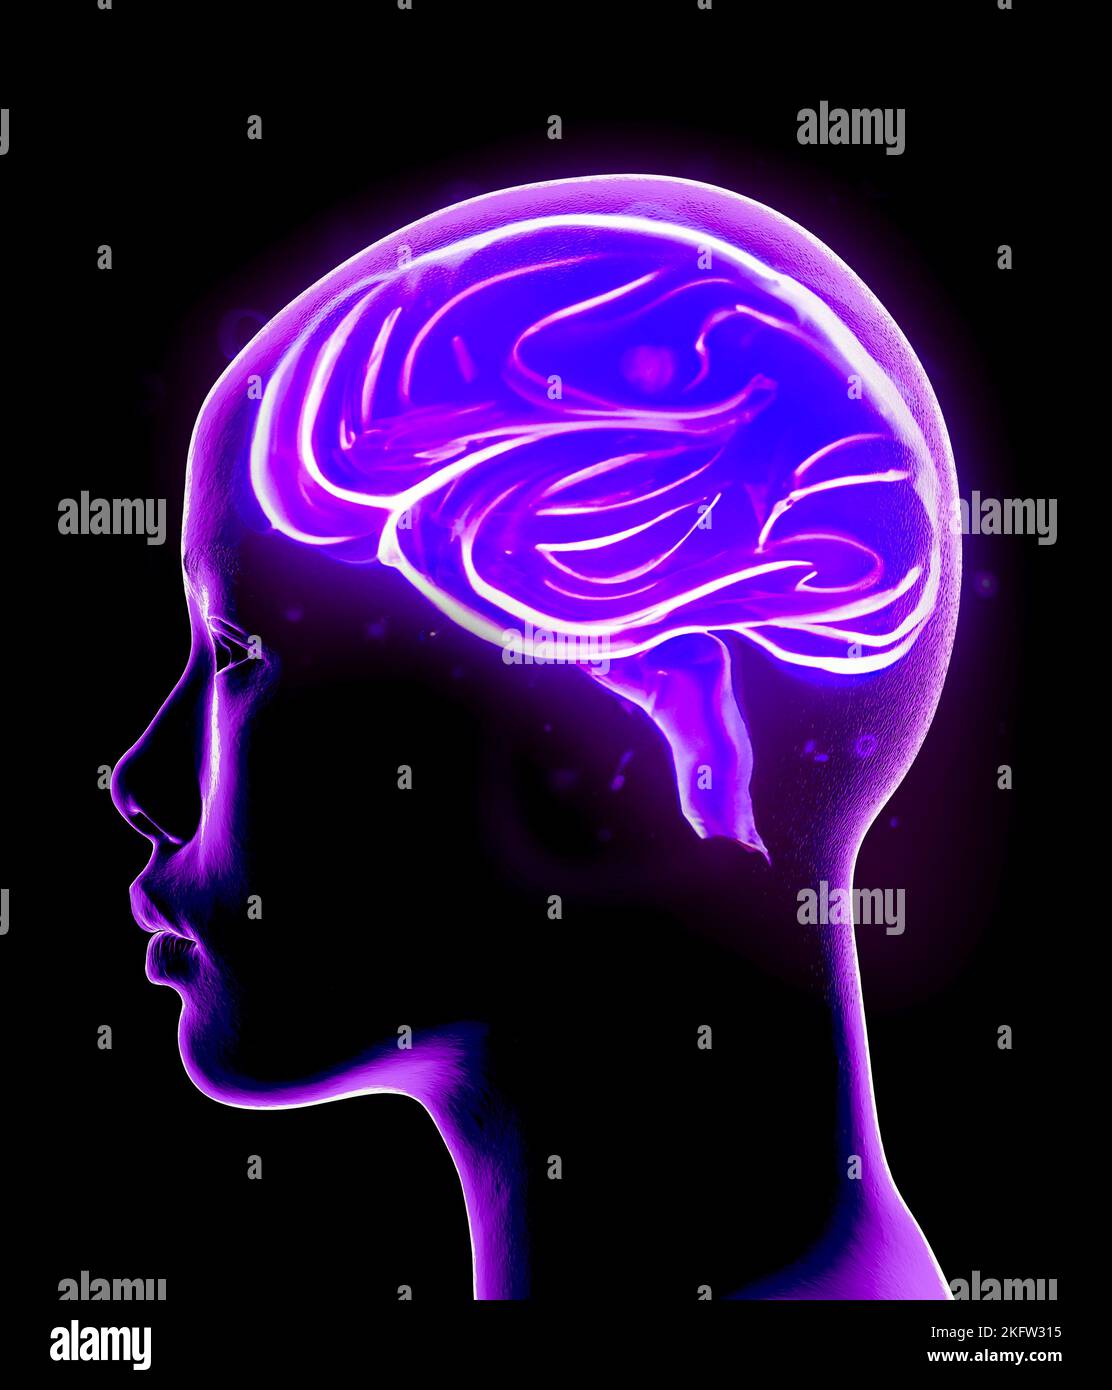 Neurology, philosophy: connections, the development of thought and reflection, the infinite possibilities of the brain and mind. Human anatomy face Stock Photo